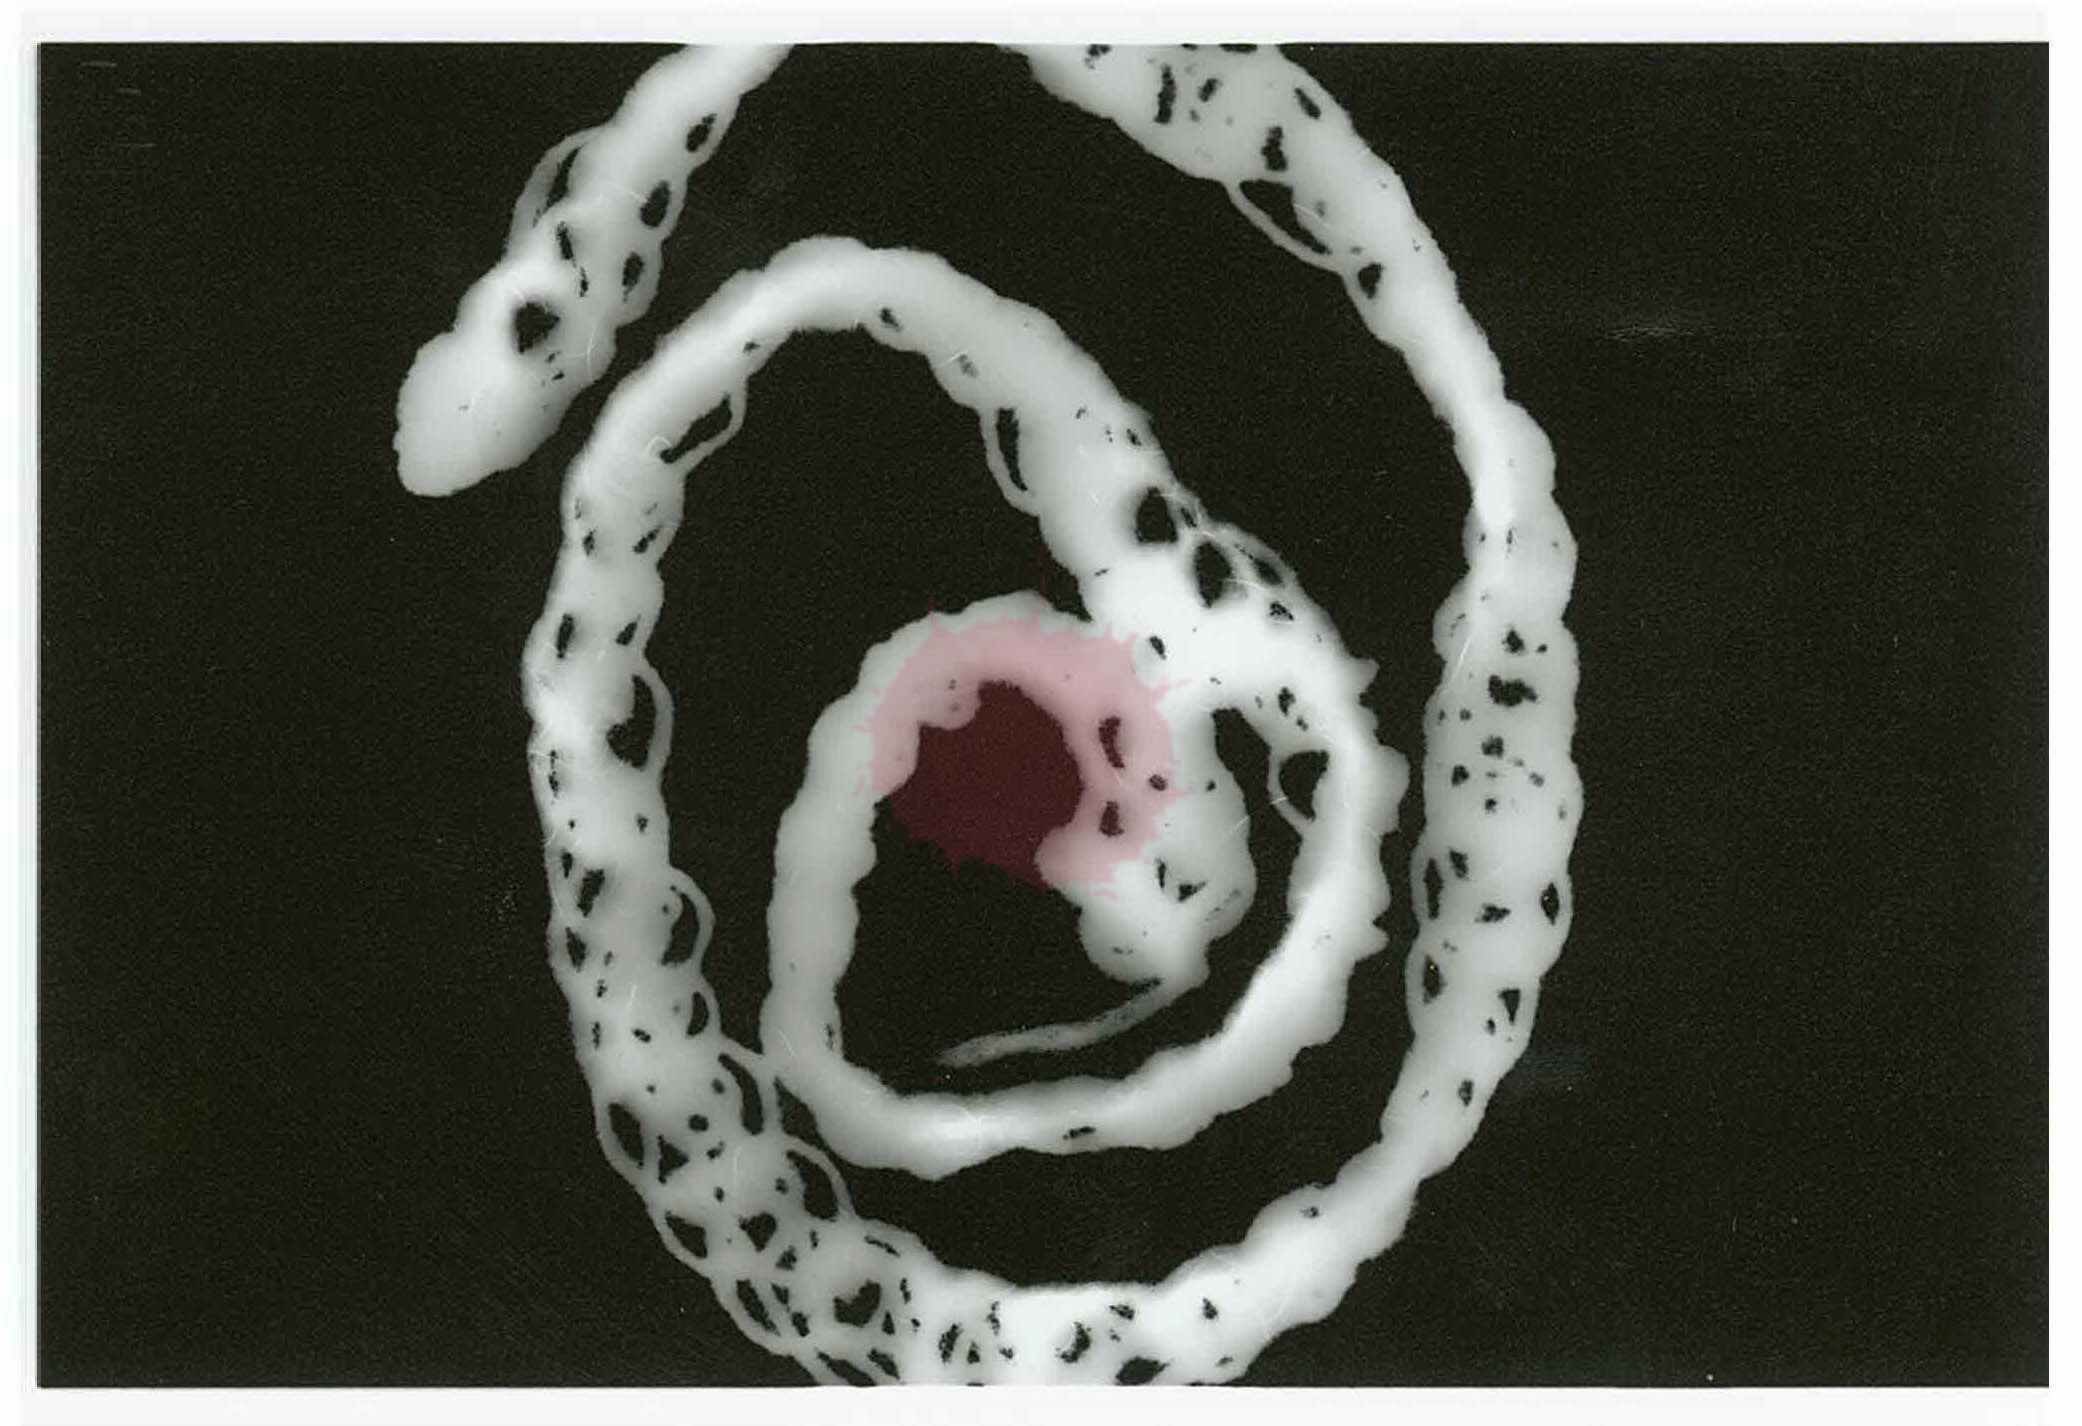 Crocheted chain printed on black & white silver gelatin photo paper - 2018